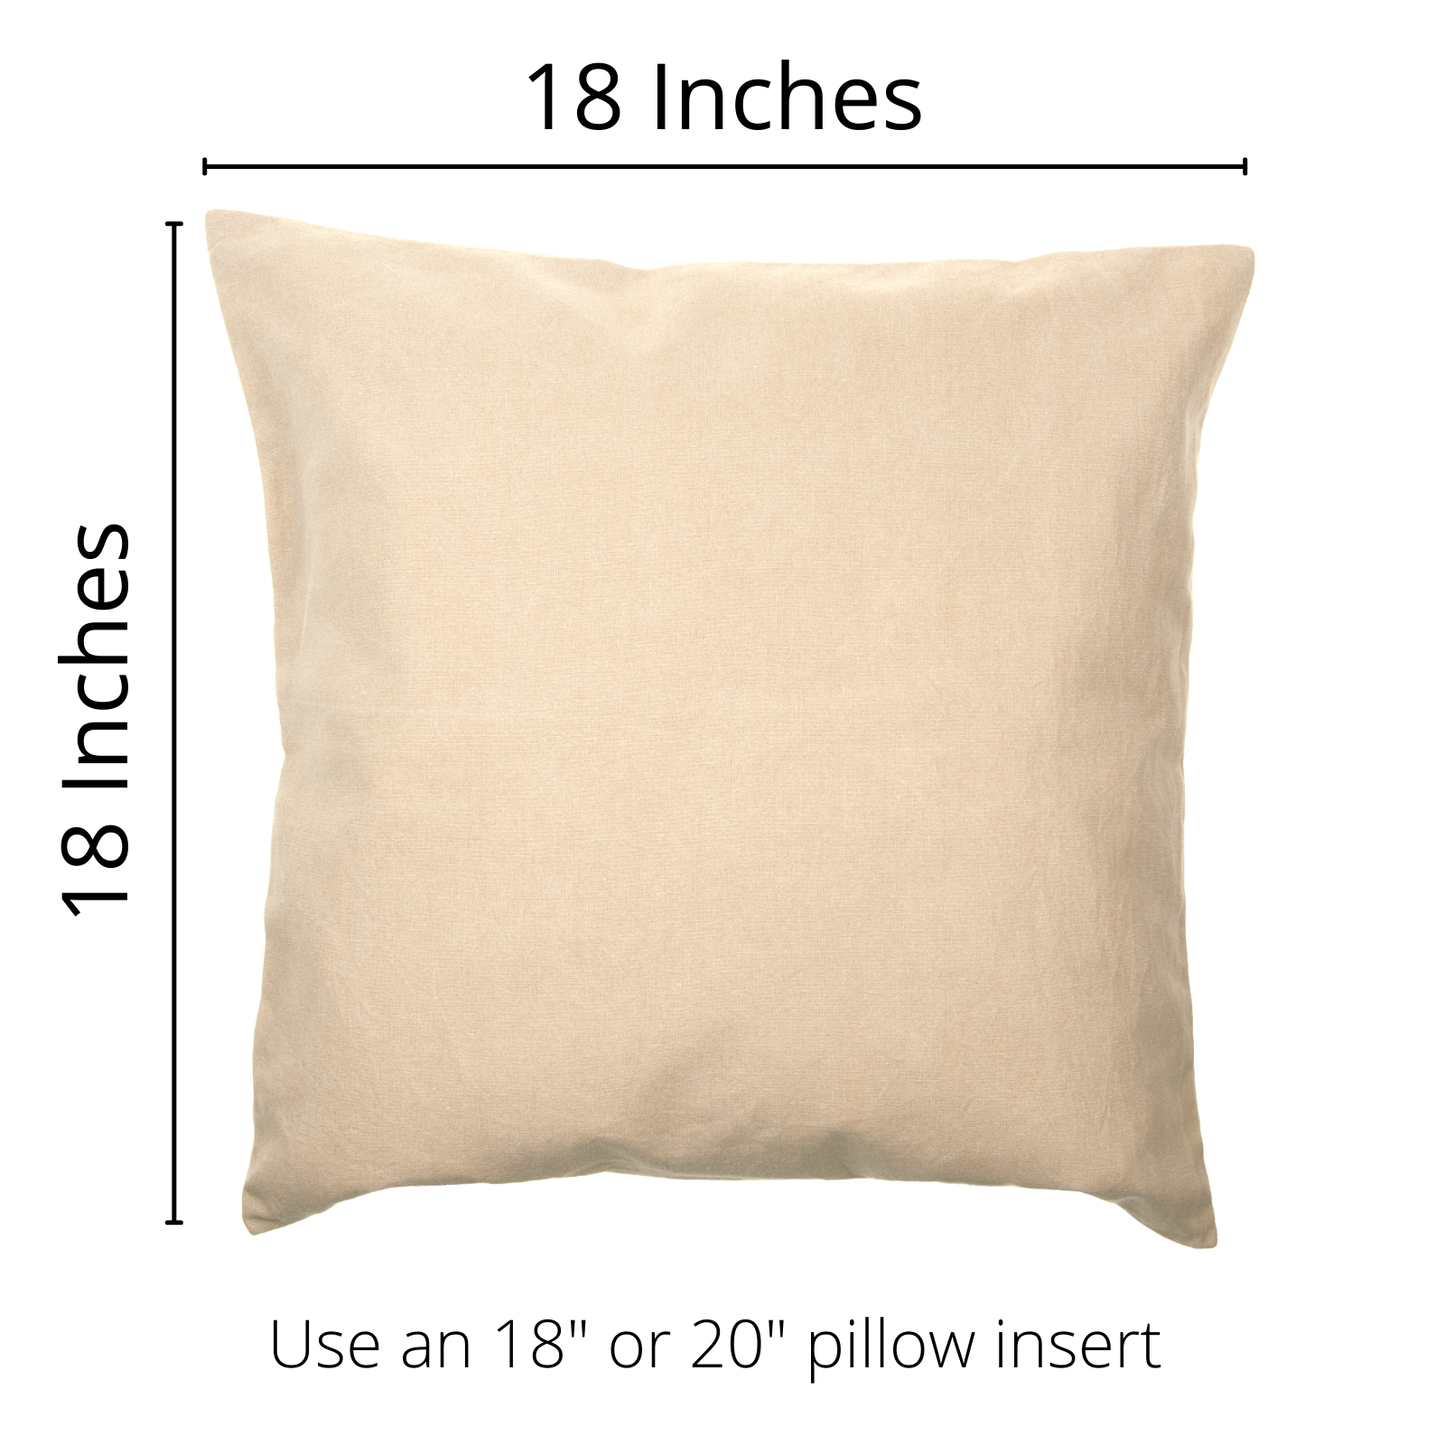 Crossed Arrows Love Pillow Cover